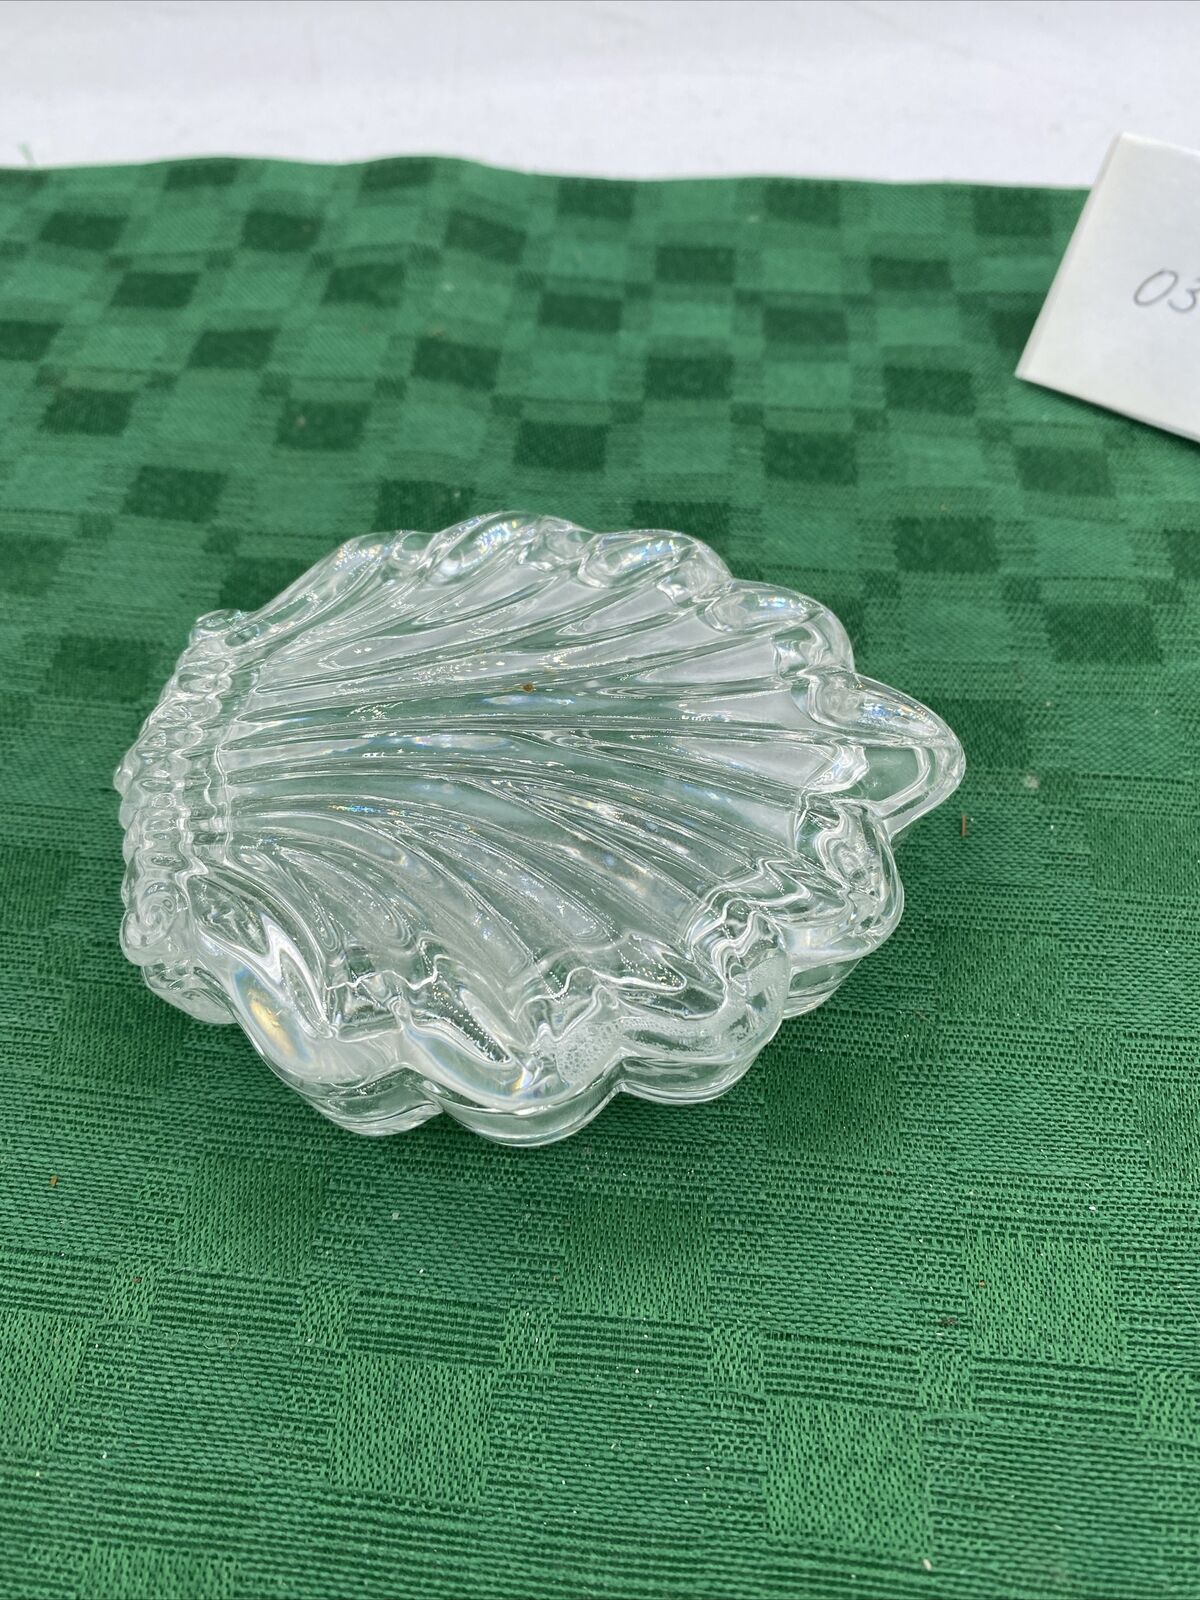 Vintage Glass Crystal Seashell Shape Trinket Box Scalloped Container Dish Clear